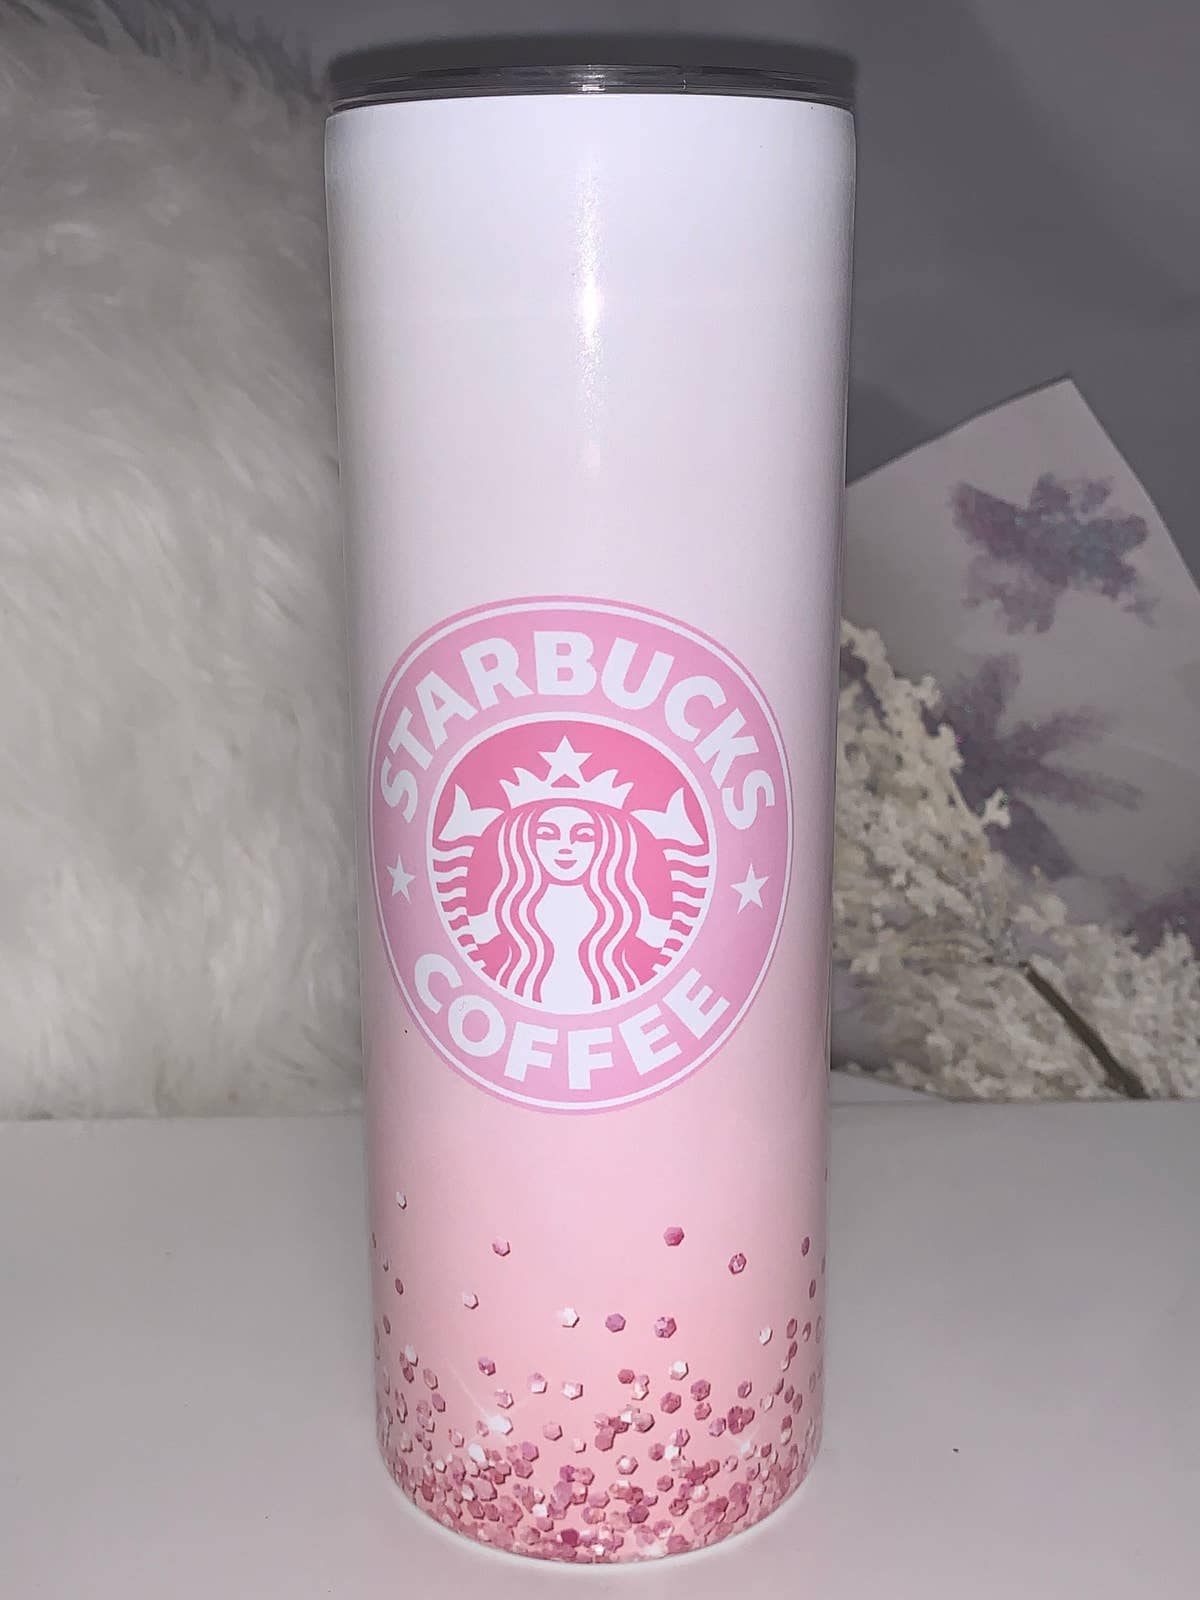 Personalized Butterlfy Tumbler Pink Glitter Jewelry Style 20oz 30oz Tumblers  with Lid Gift for Women Girl Daughter Sister Mom Valentine Birthday 